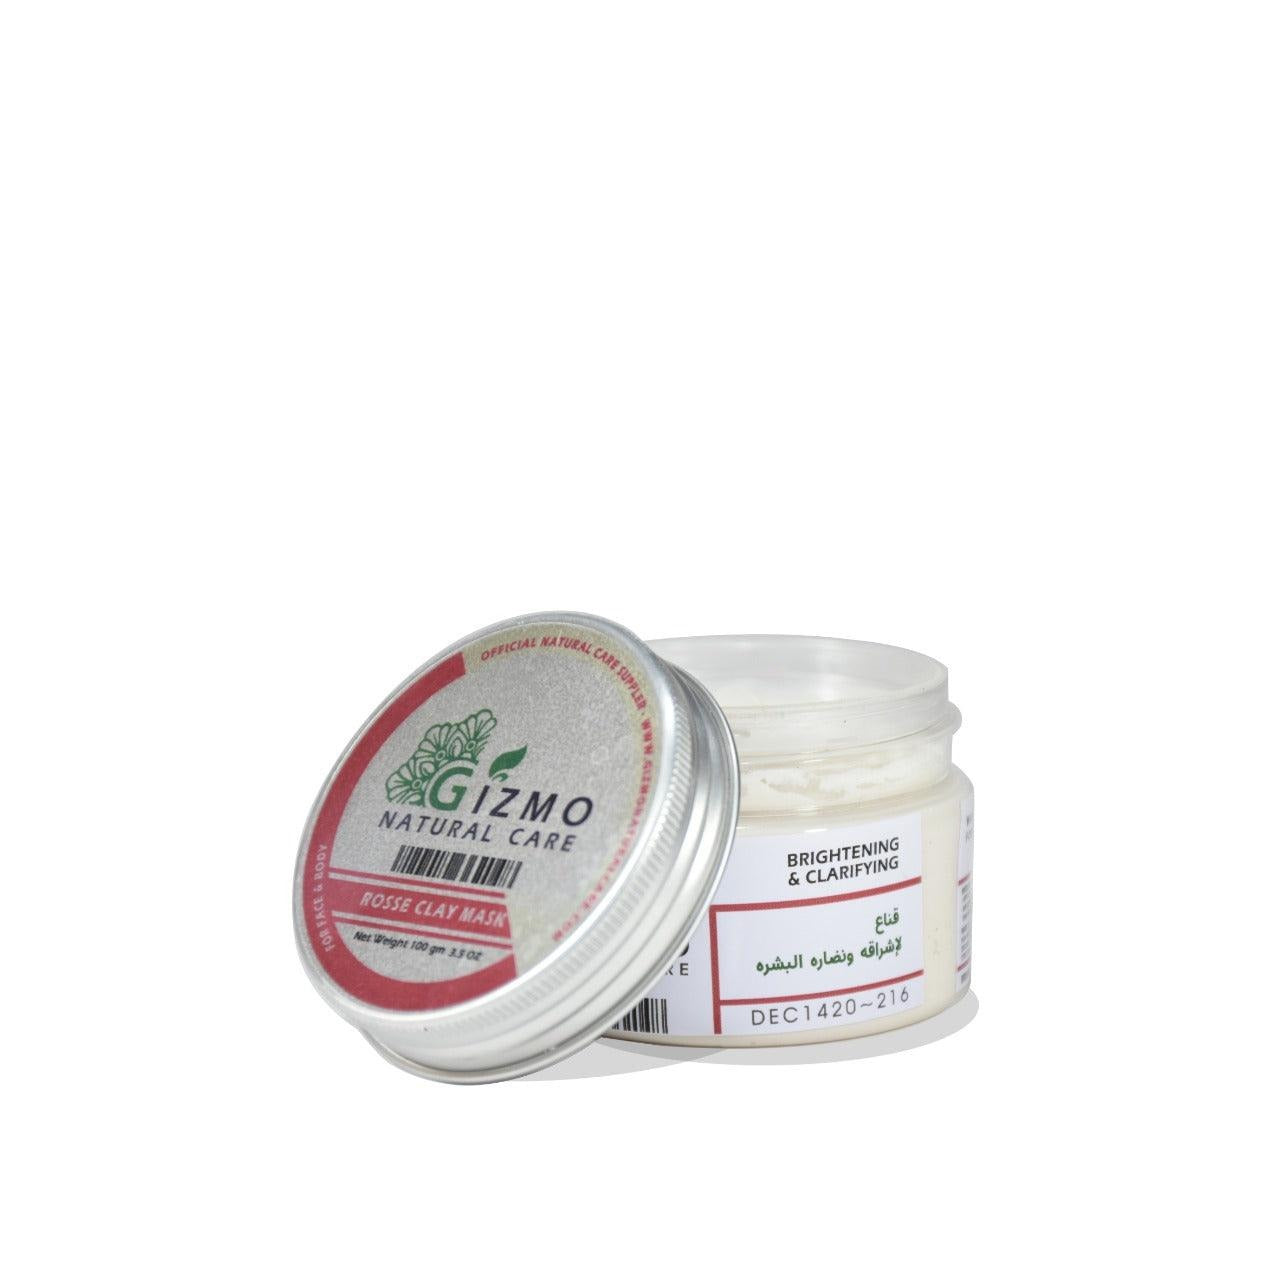 Gizmo White Clay with Rose oil Face and body mask Brightening and clarifying mask 100 gm - Beauty Bounty